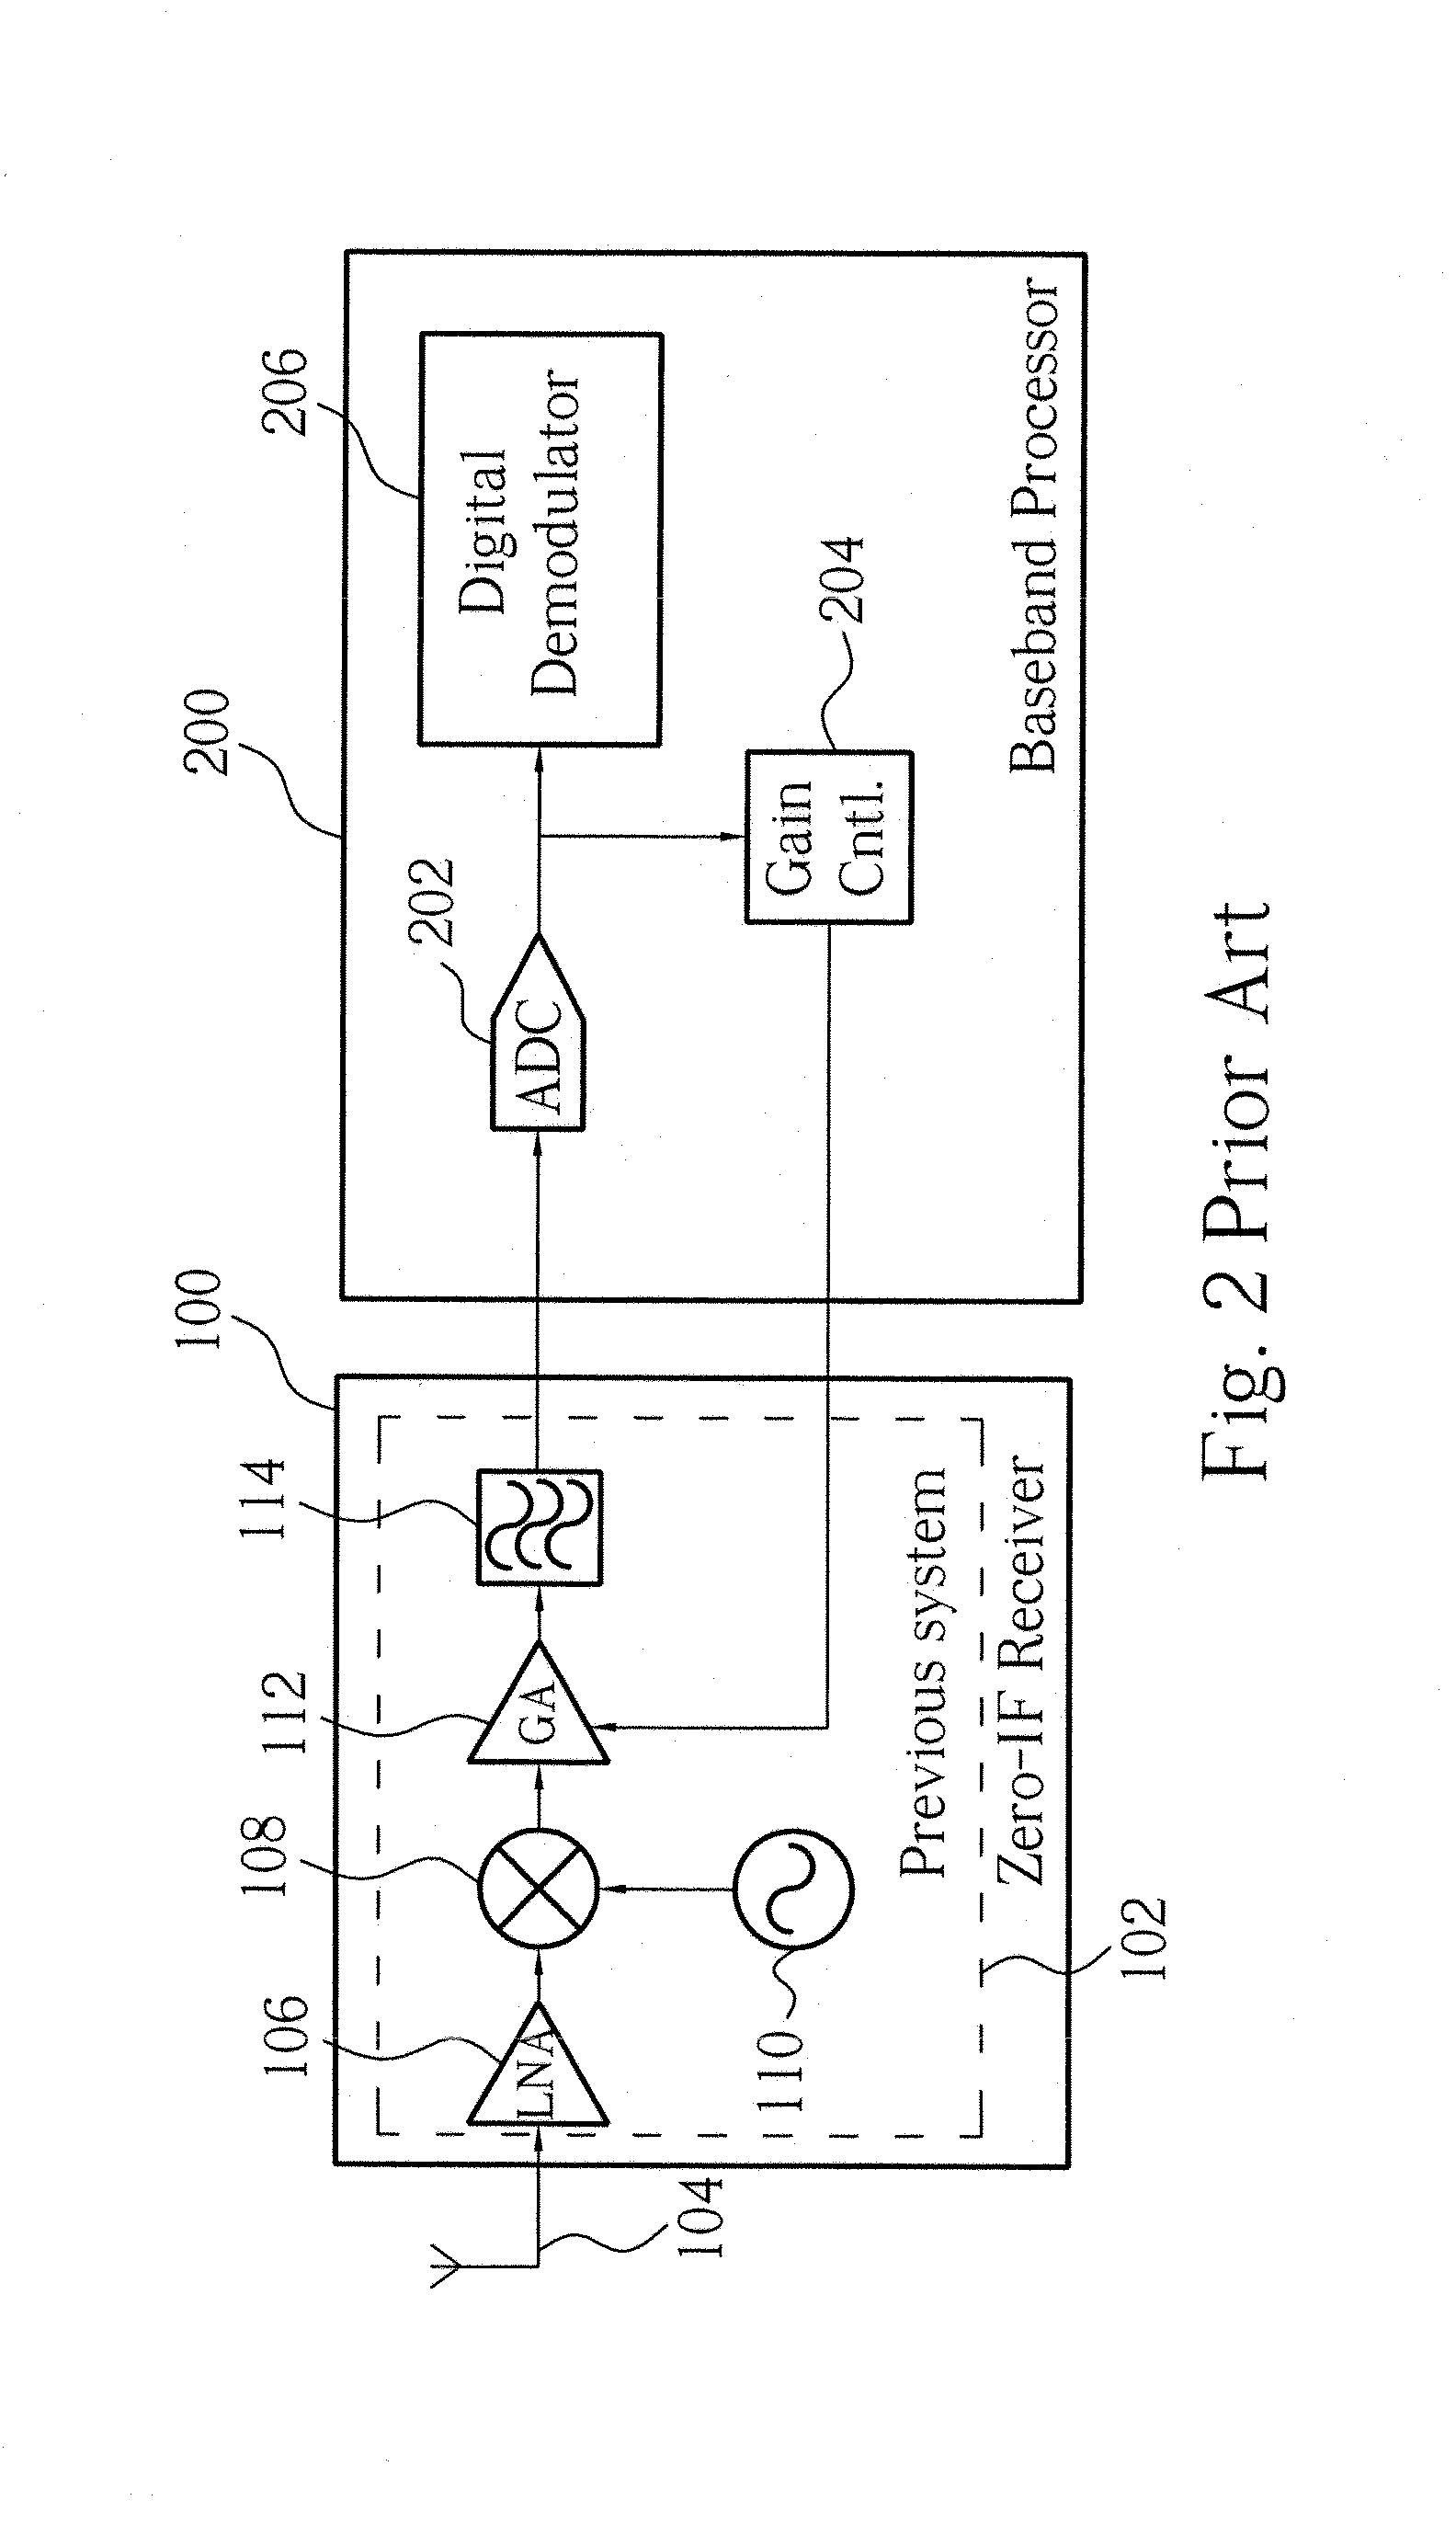 Device for WLAN baseband processing with DC offset reduction